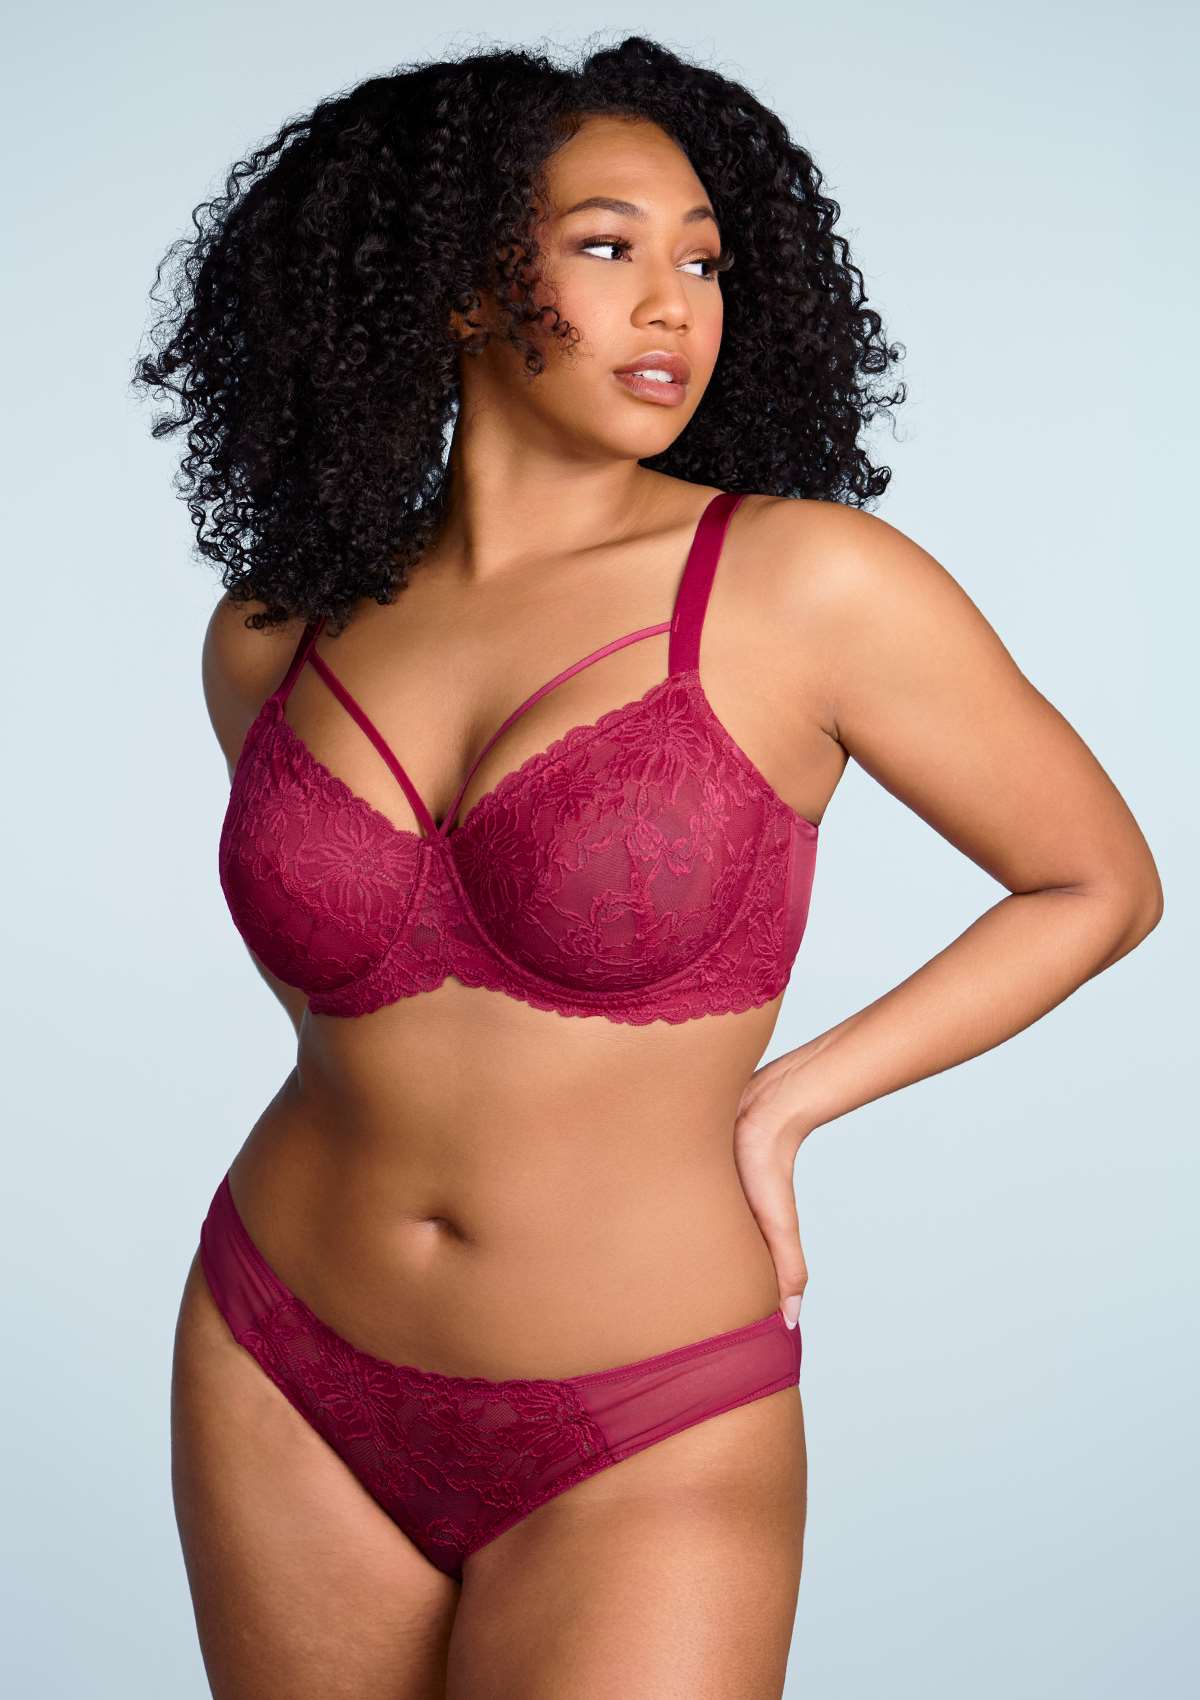 HSIA Pretty In Petals Lace Panties And Bra Set: Plus Size Women Bra - Red / 34 / I